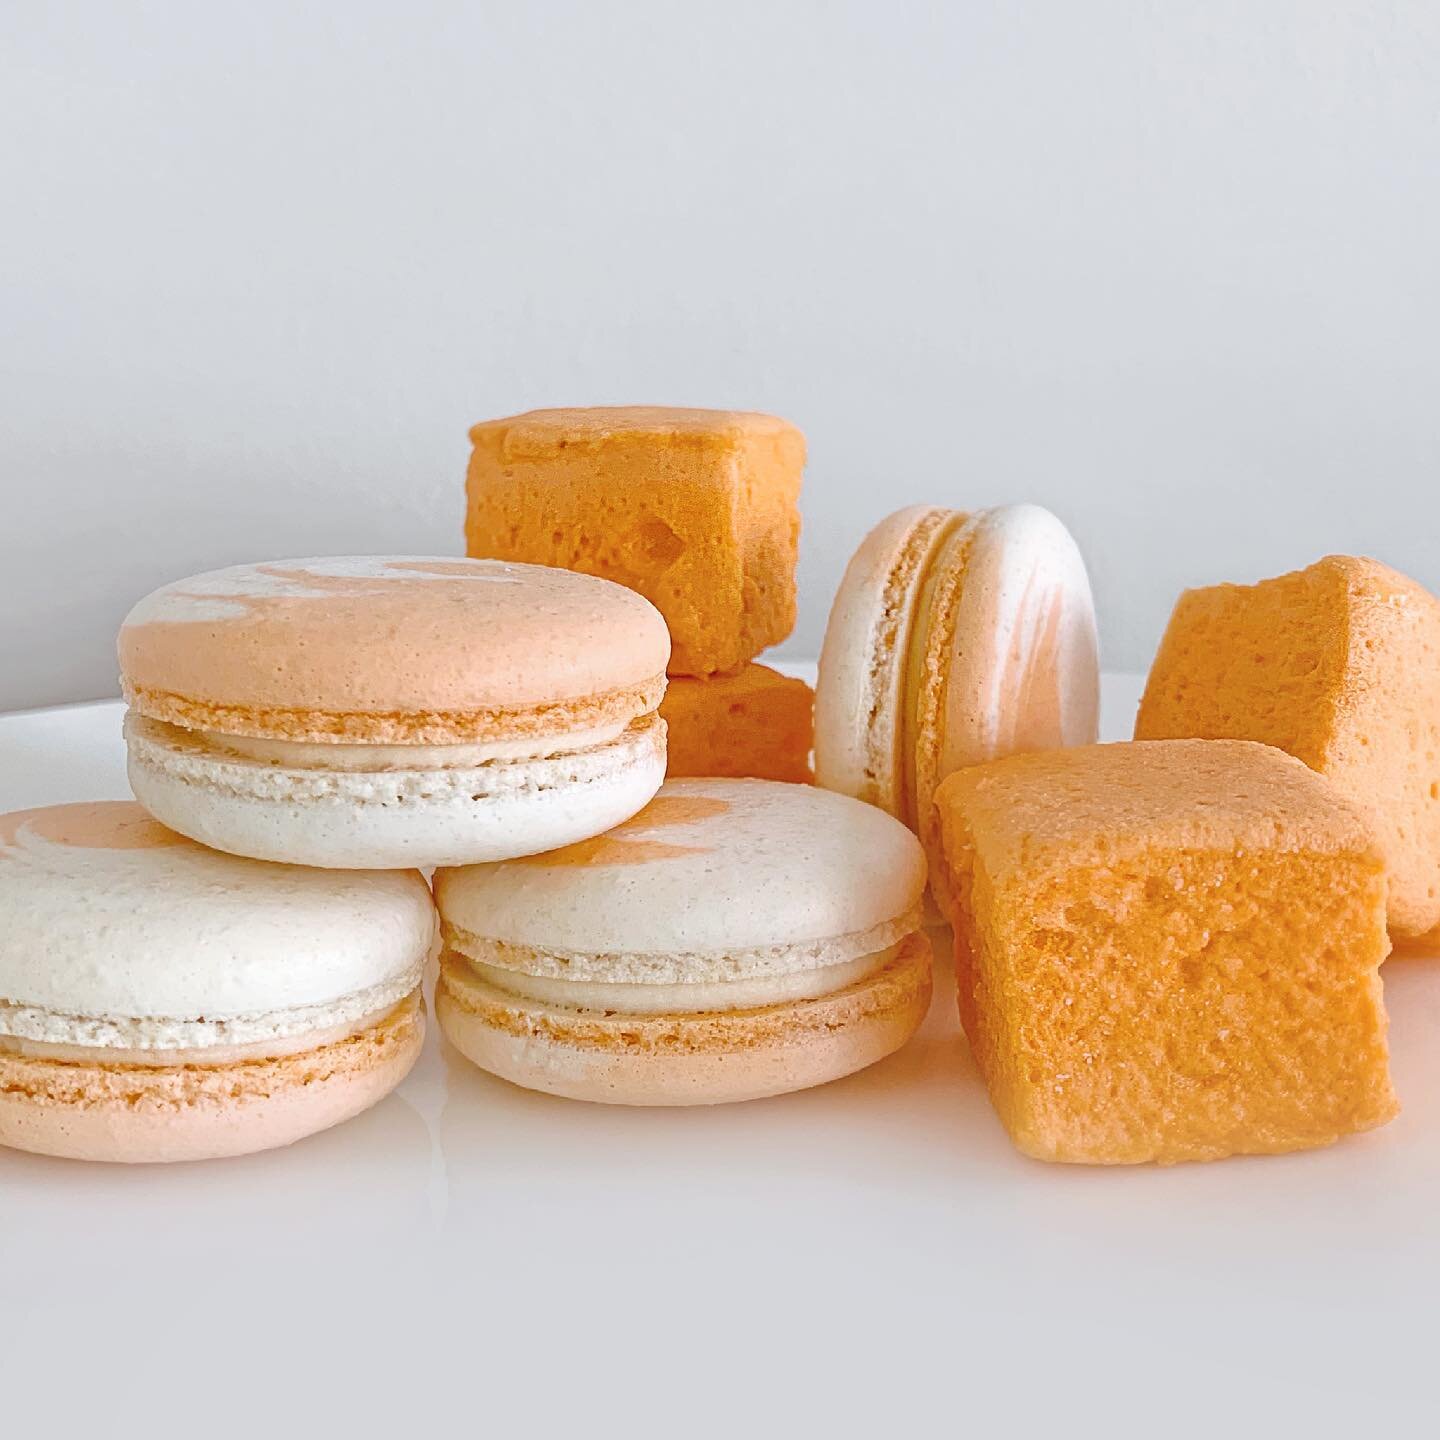 [GIVEAWAY] It&rsquo;s officially creamsicle season!! (That&rsquo;s a thing, right?!) So @xo.marshmallow and I teamed up to bring you some orangey vanilla-y goodness! One winner will snag a dozen creamsicle macarons and a dozen creamsicle marshmallows